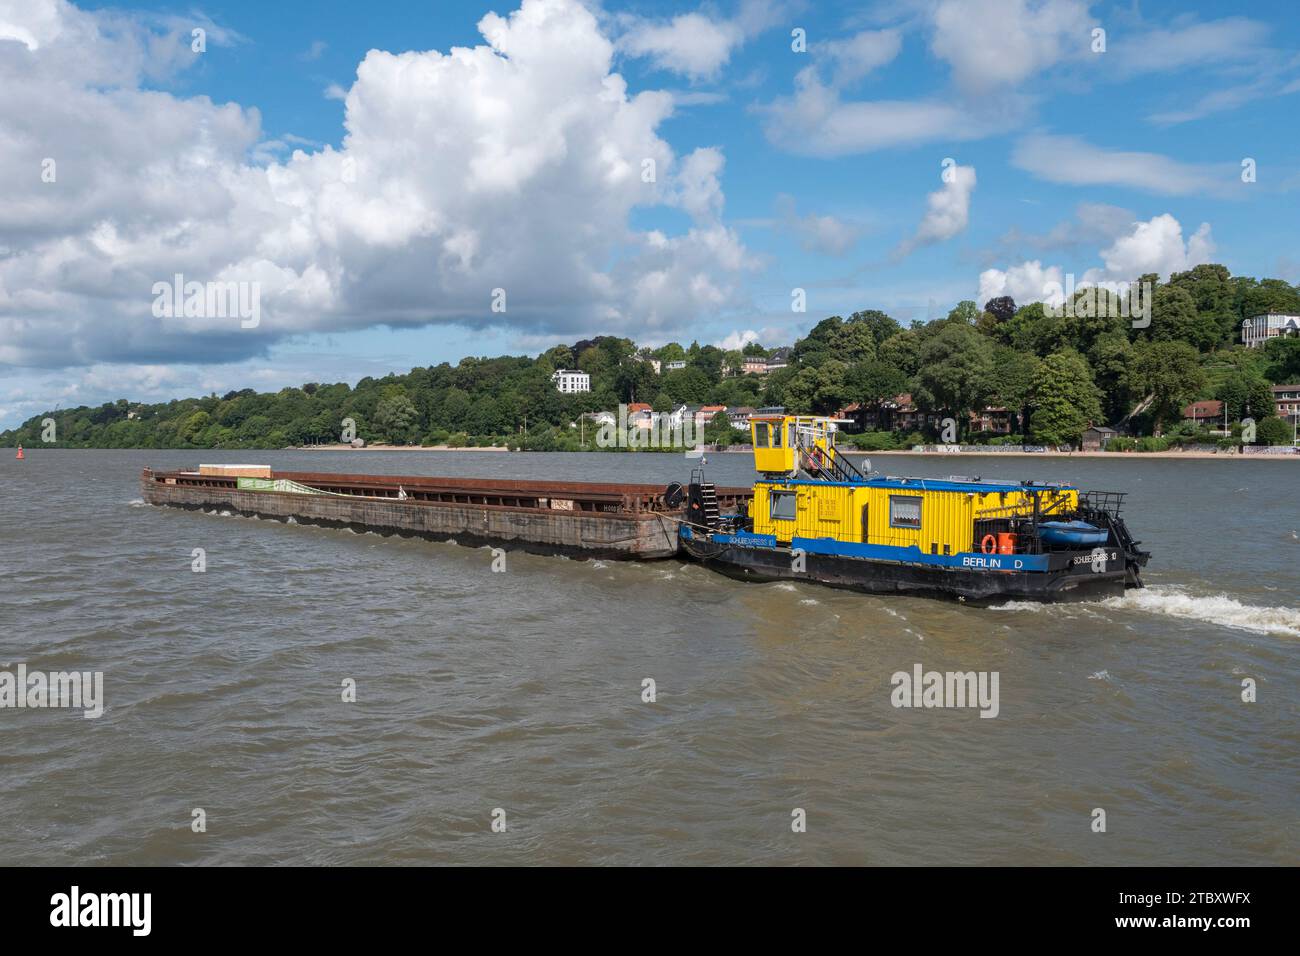 The Schub Express 10 inland pushboat pushing a large barge along the River Elbe, viewed from the 62 HADAG ferry in Hamburg, Germany. Stock Photo